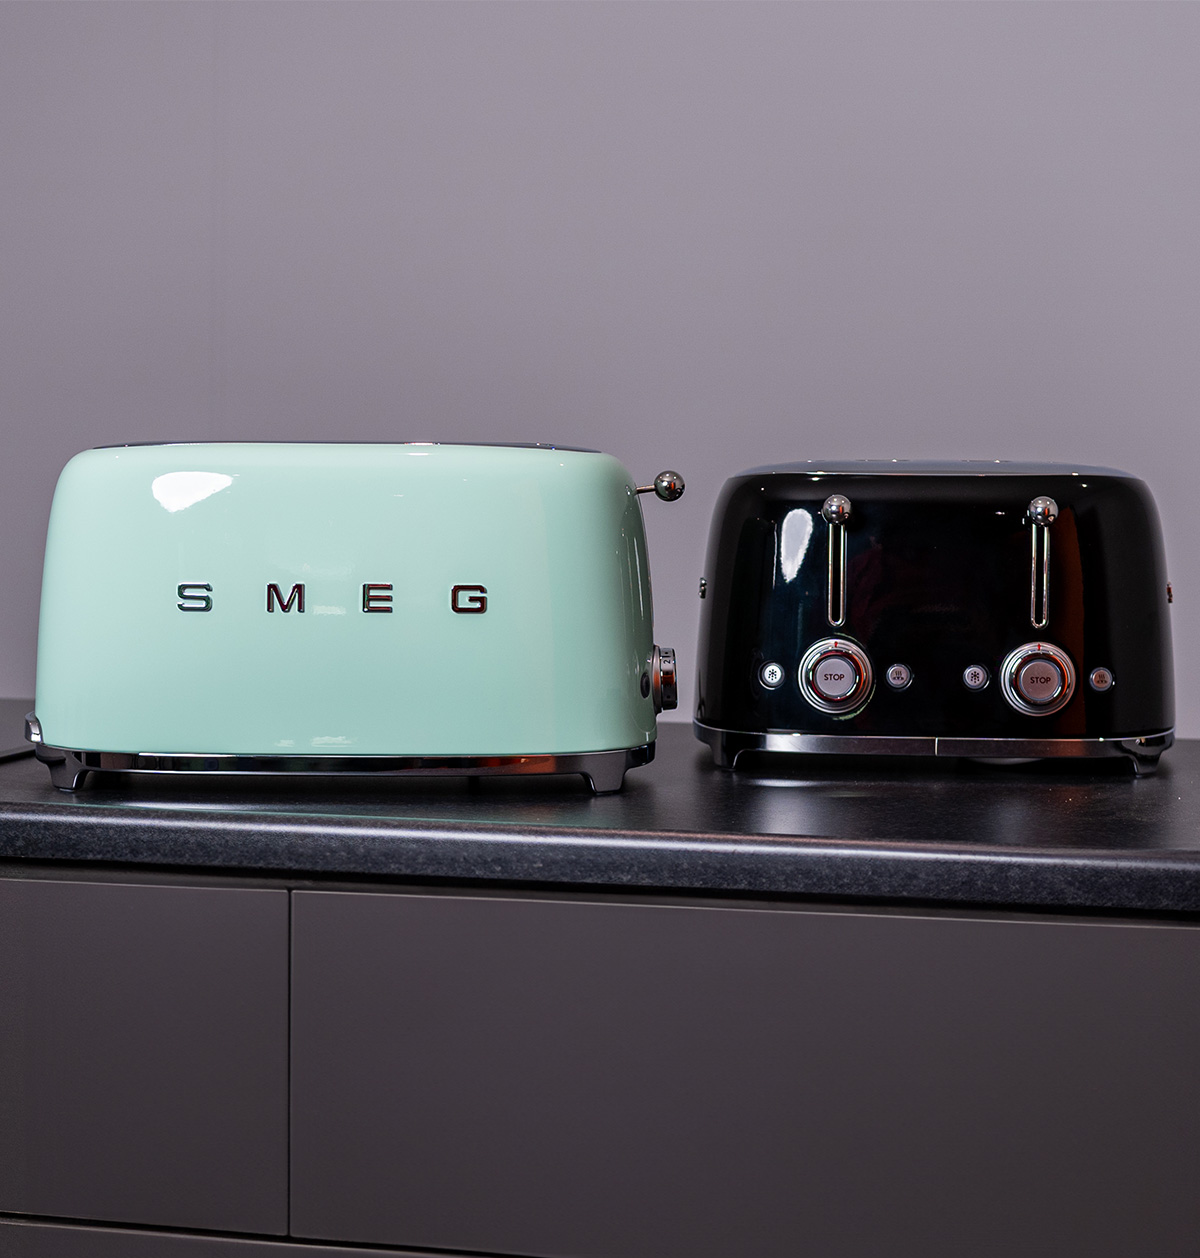 Smeg broodrooster review | Expert